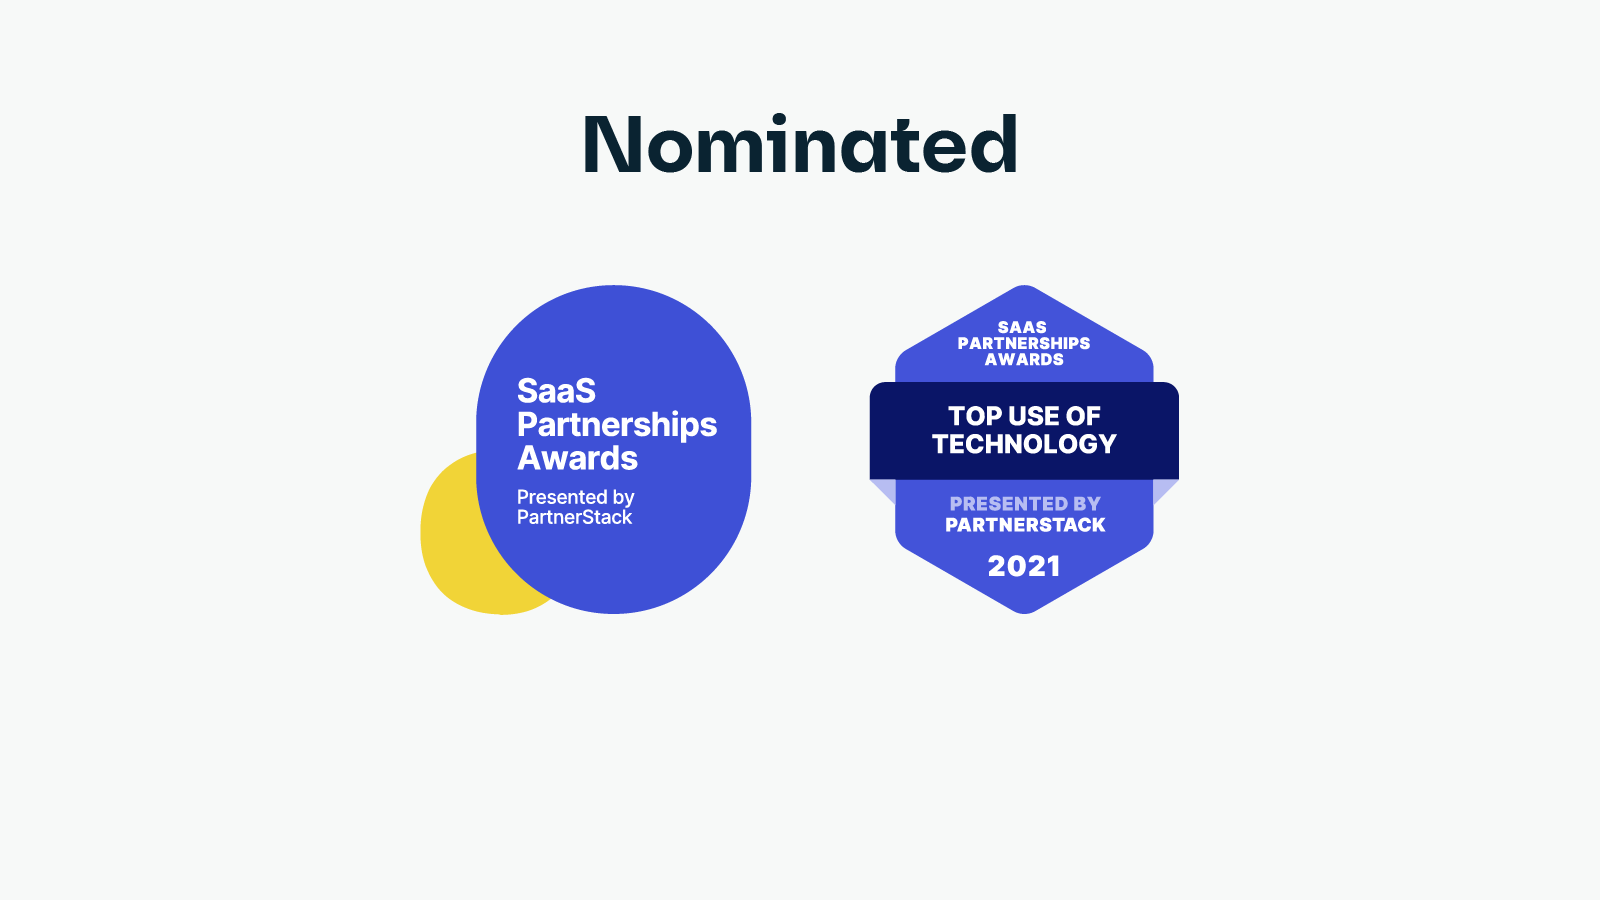 SaaS Partnerships Awards Presented by PartnerStack — Top Use of Technology.